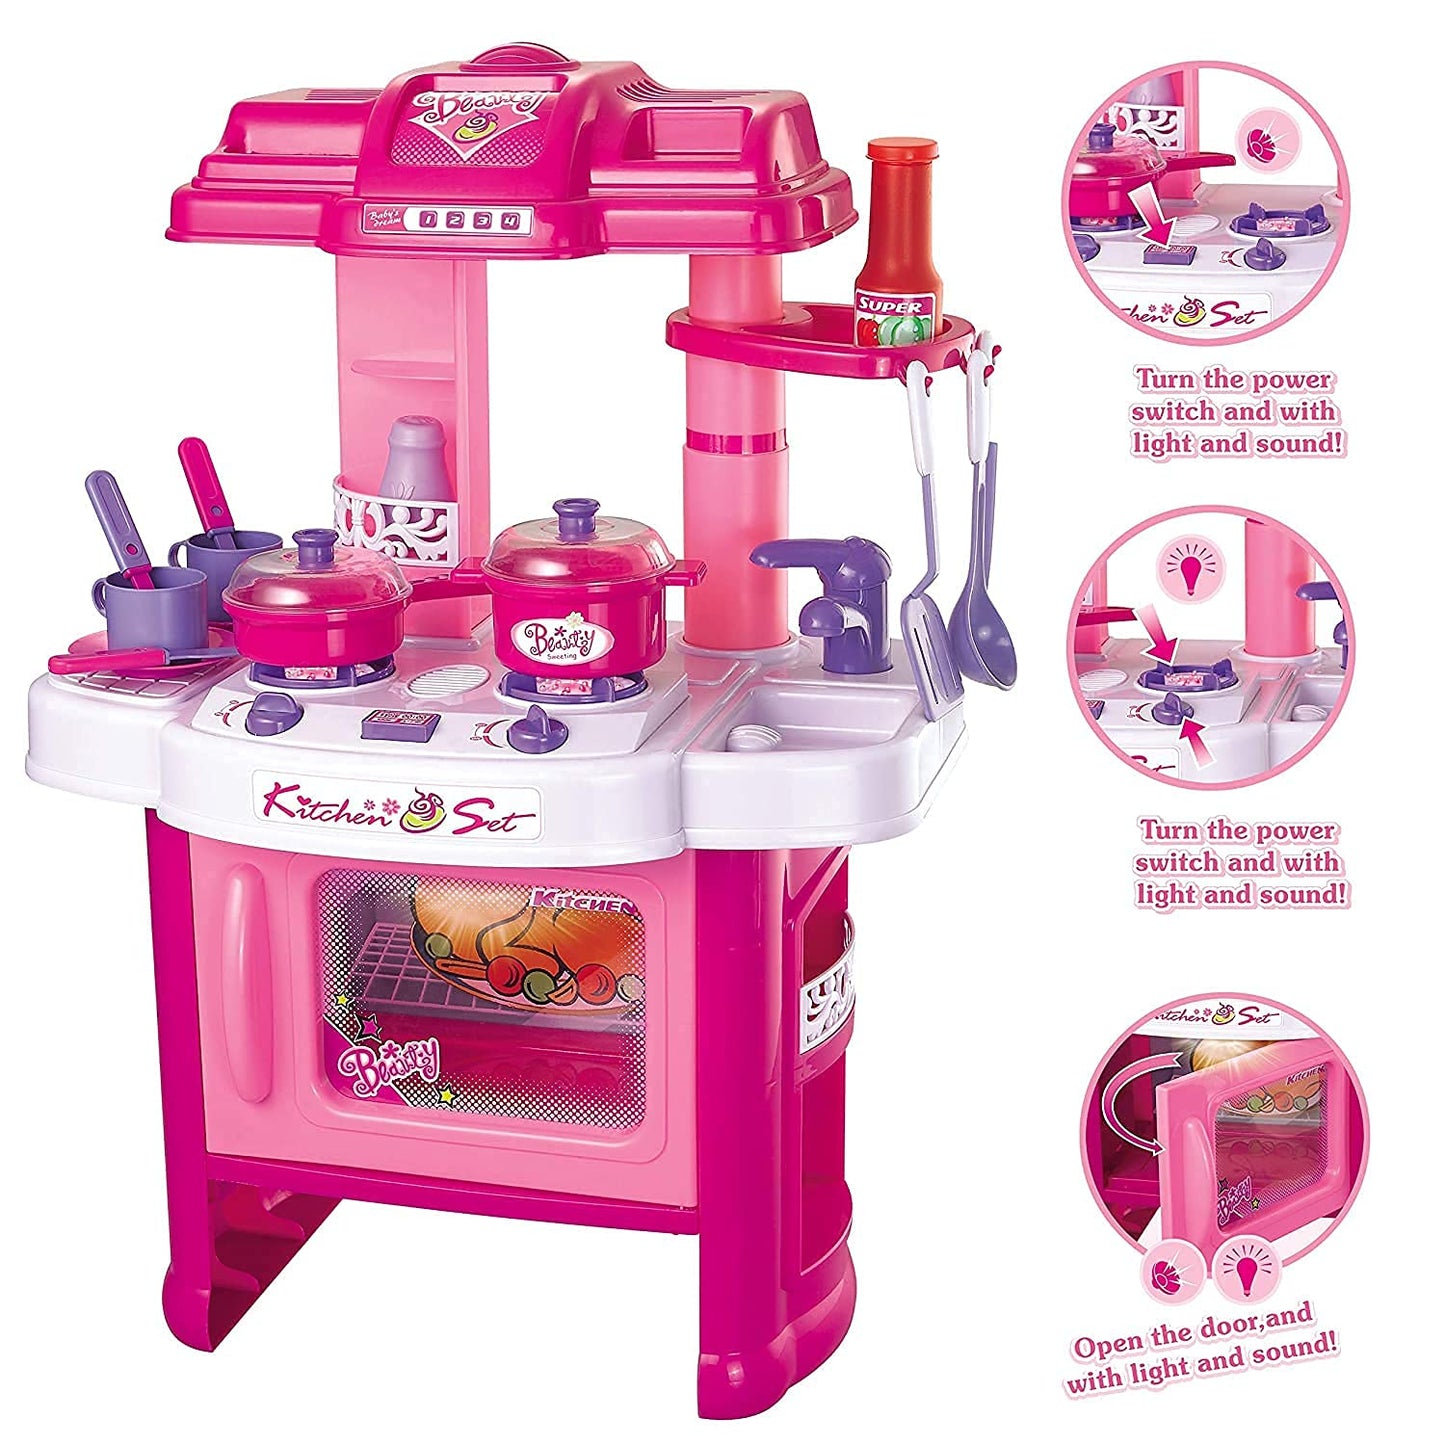 AZi® Kitchen Set Liberty Imports Deluxe Beauty Kitchen Appliance Cooking Play Set | Multicolor